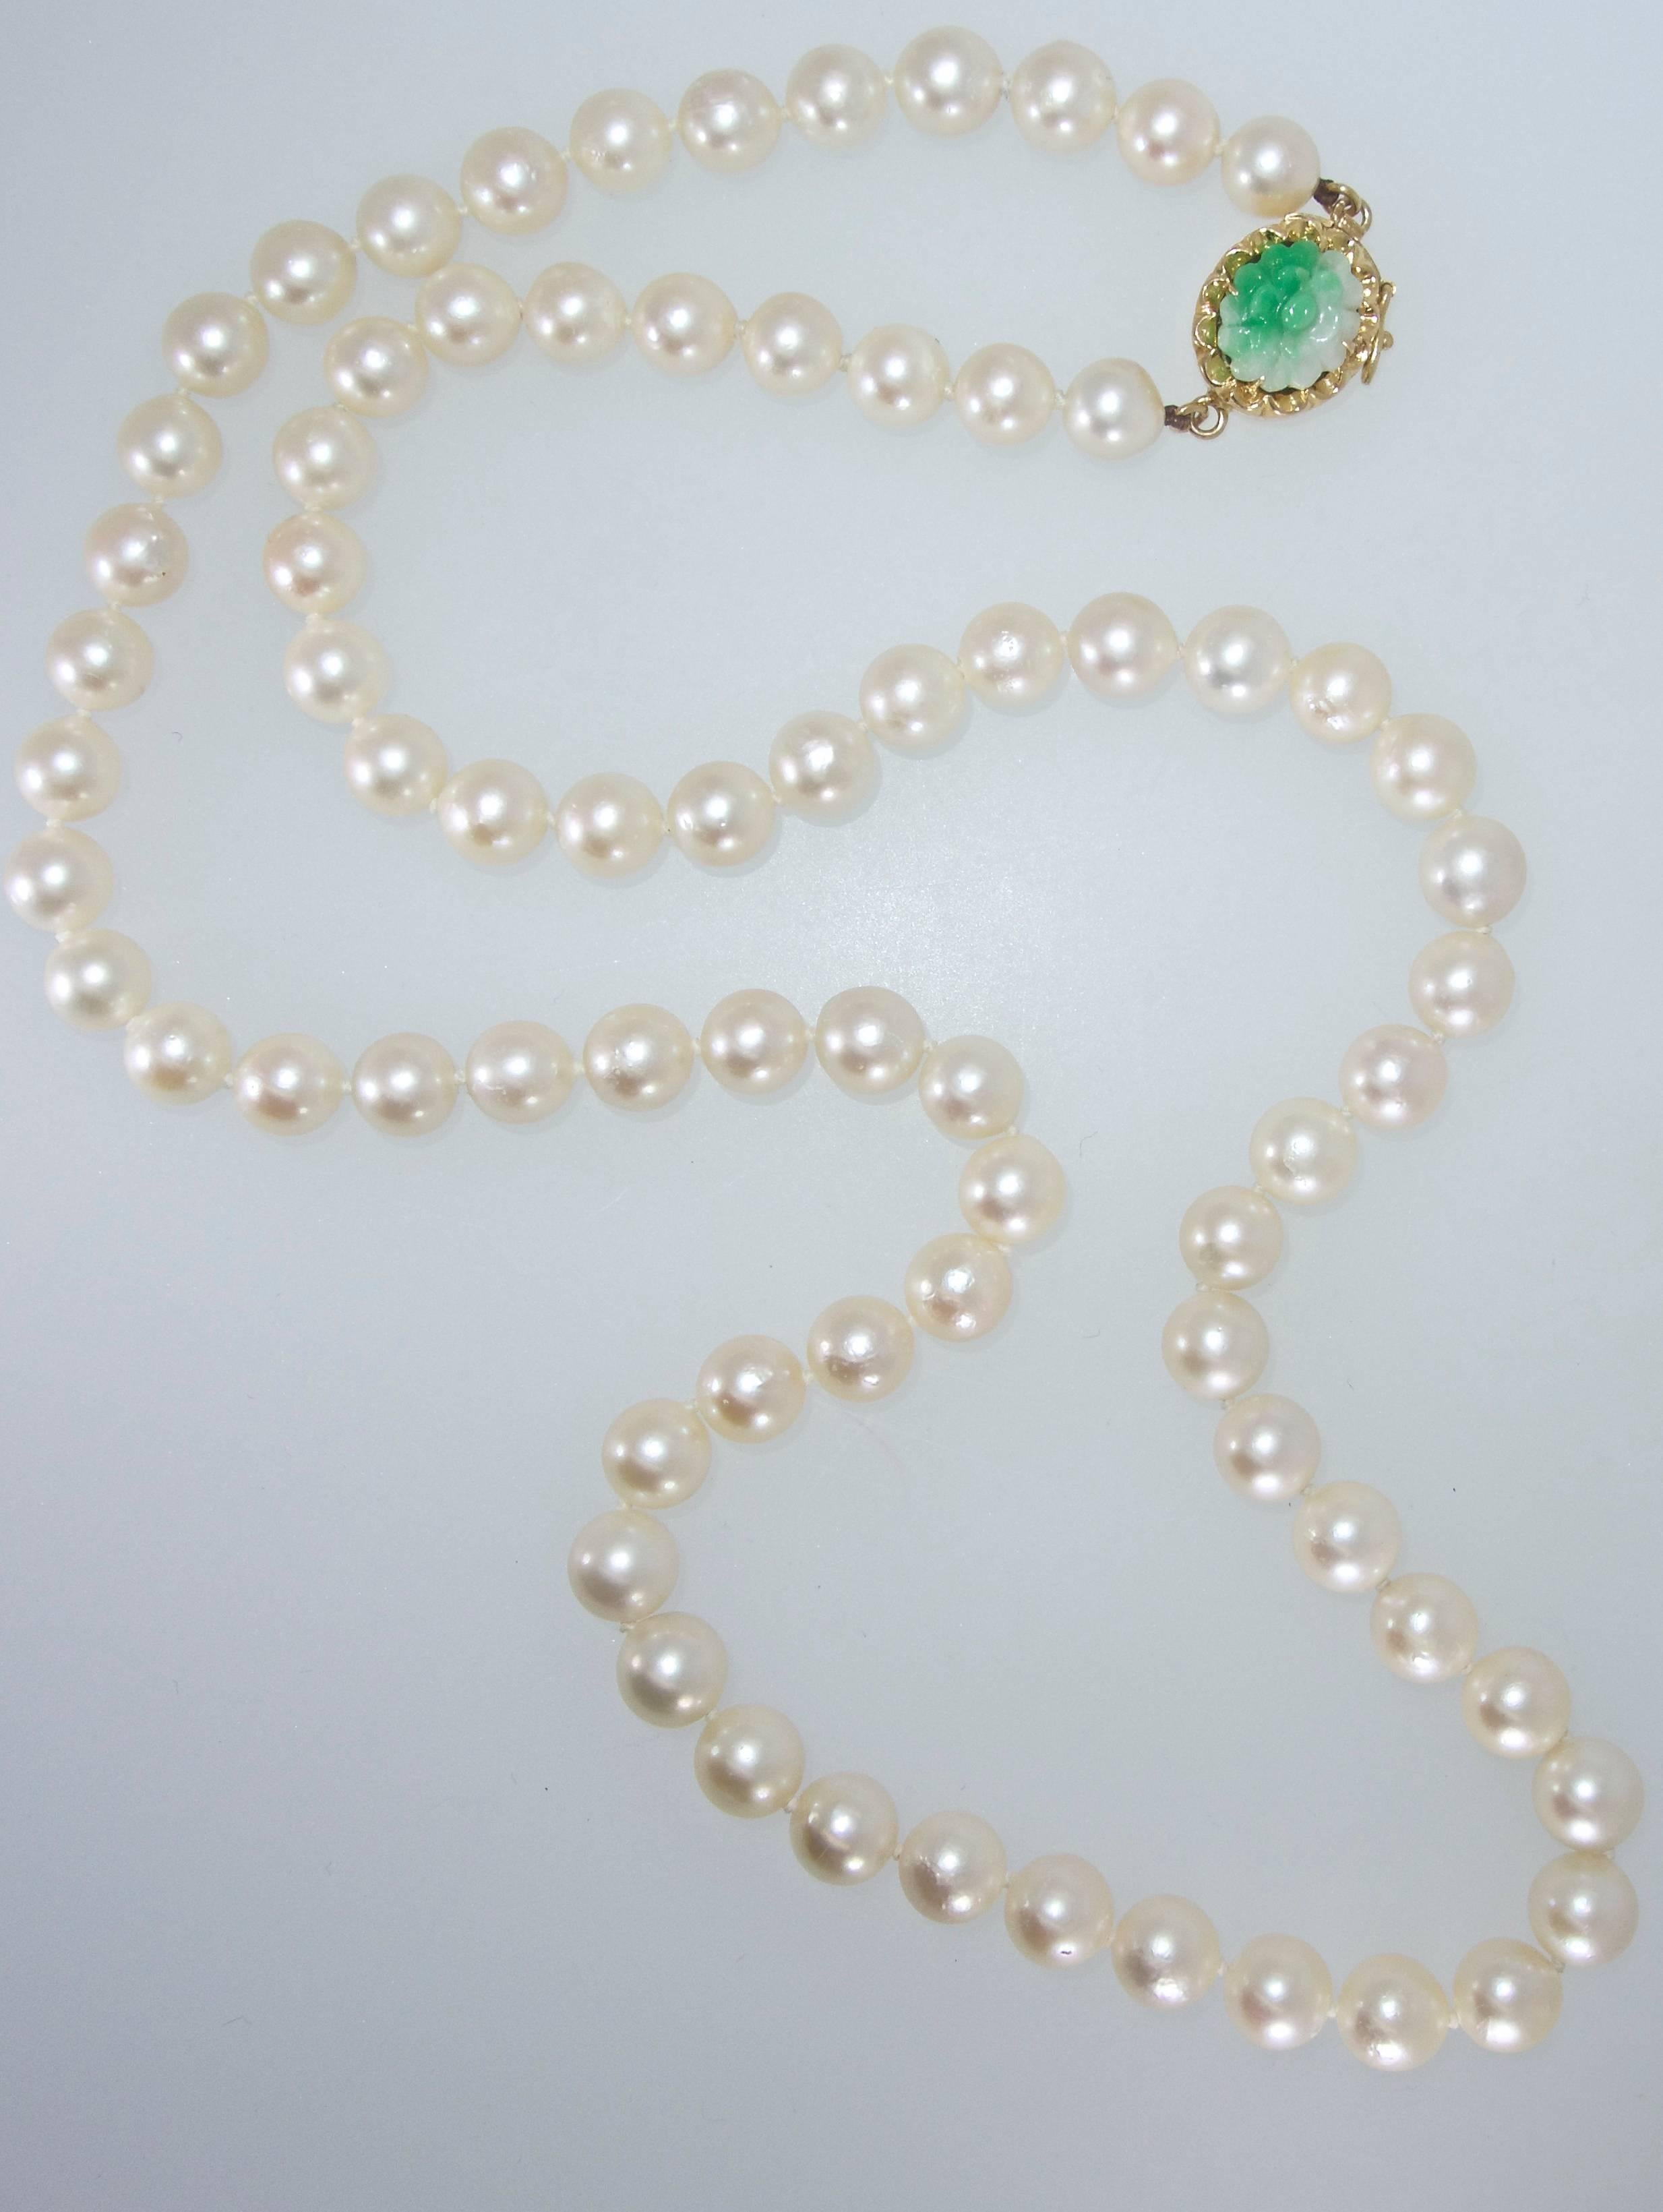 Cultured Akoya pearls ranging in size from 7 mm to 7.5 mm, fine luster,  22.5 inches in length and completed with a 14K gold and natural jadeite jade clasp.